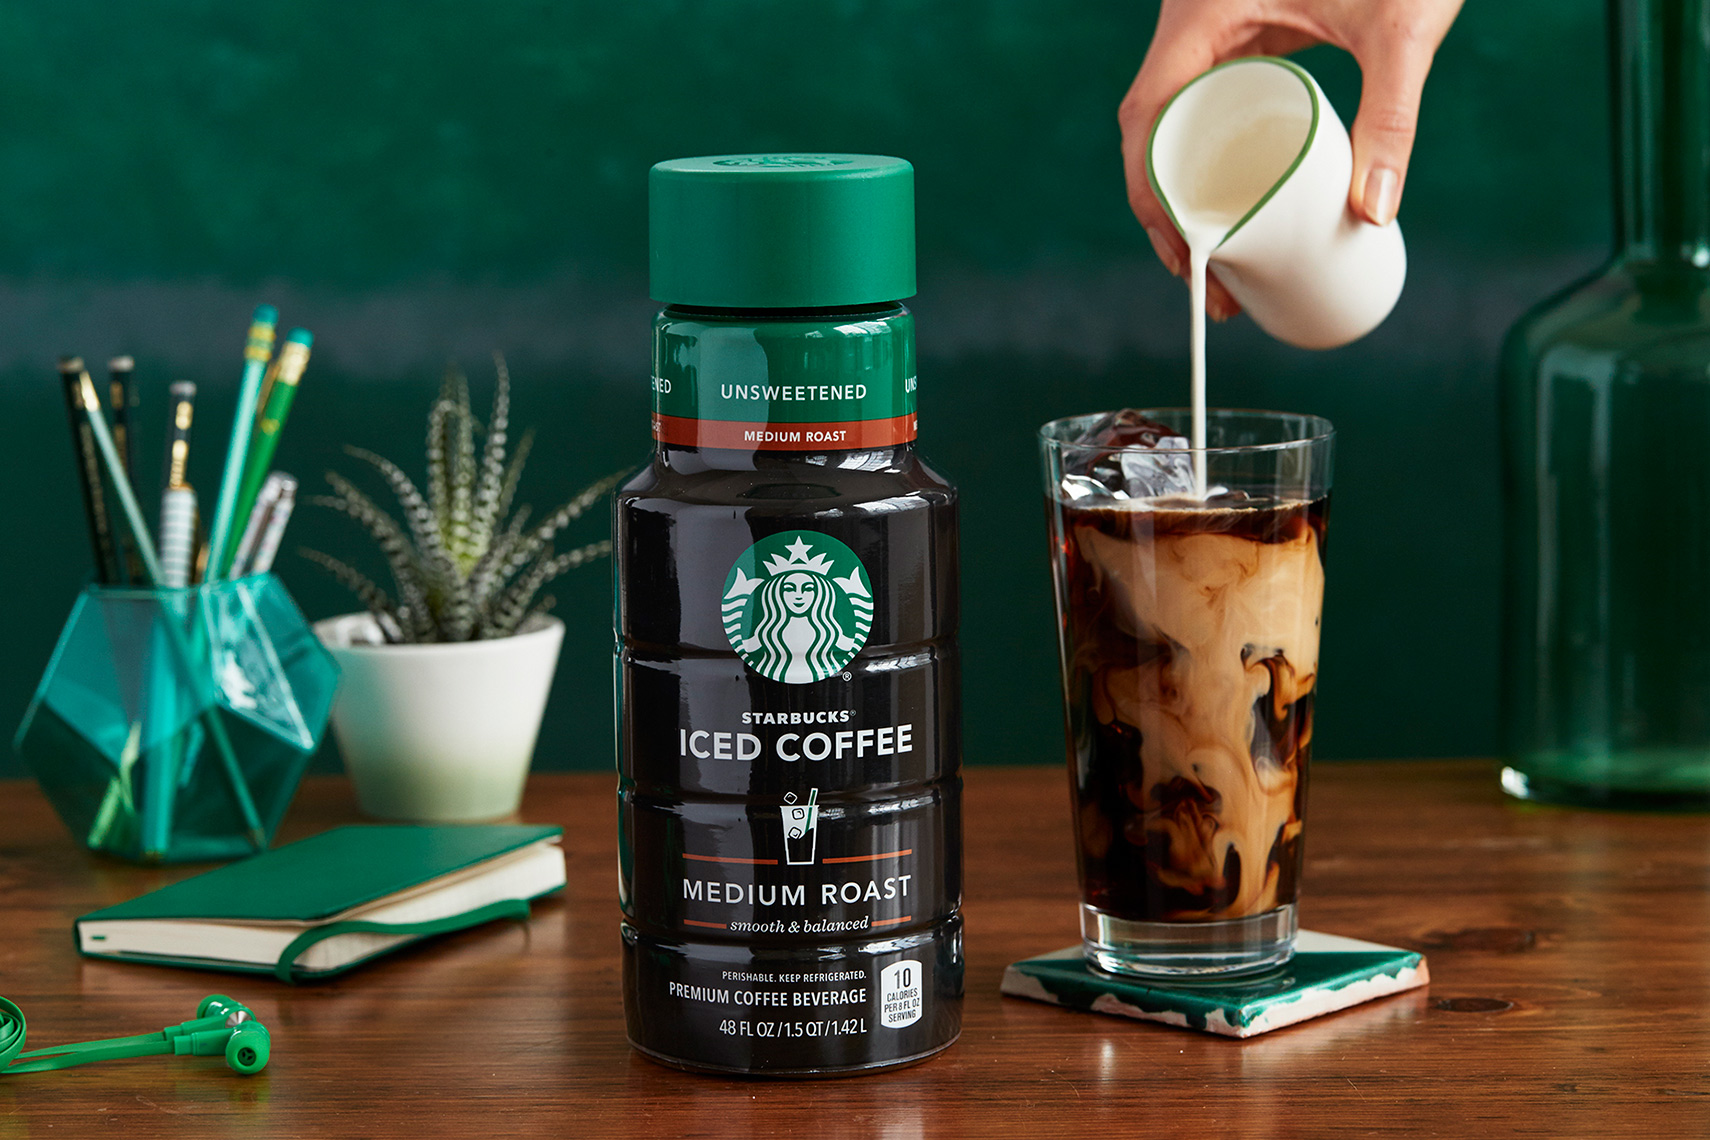 Starbucks cold brew coffee bottle with milk being poured into iced coffee glass.